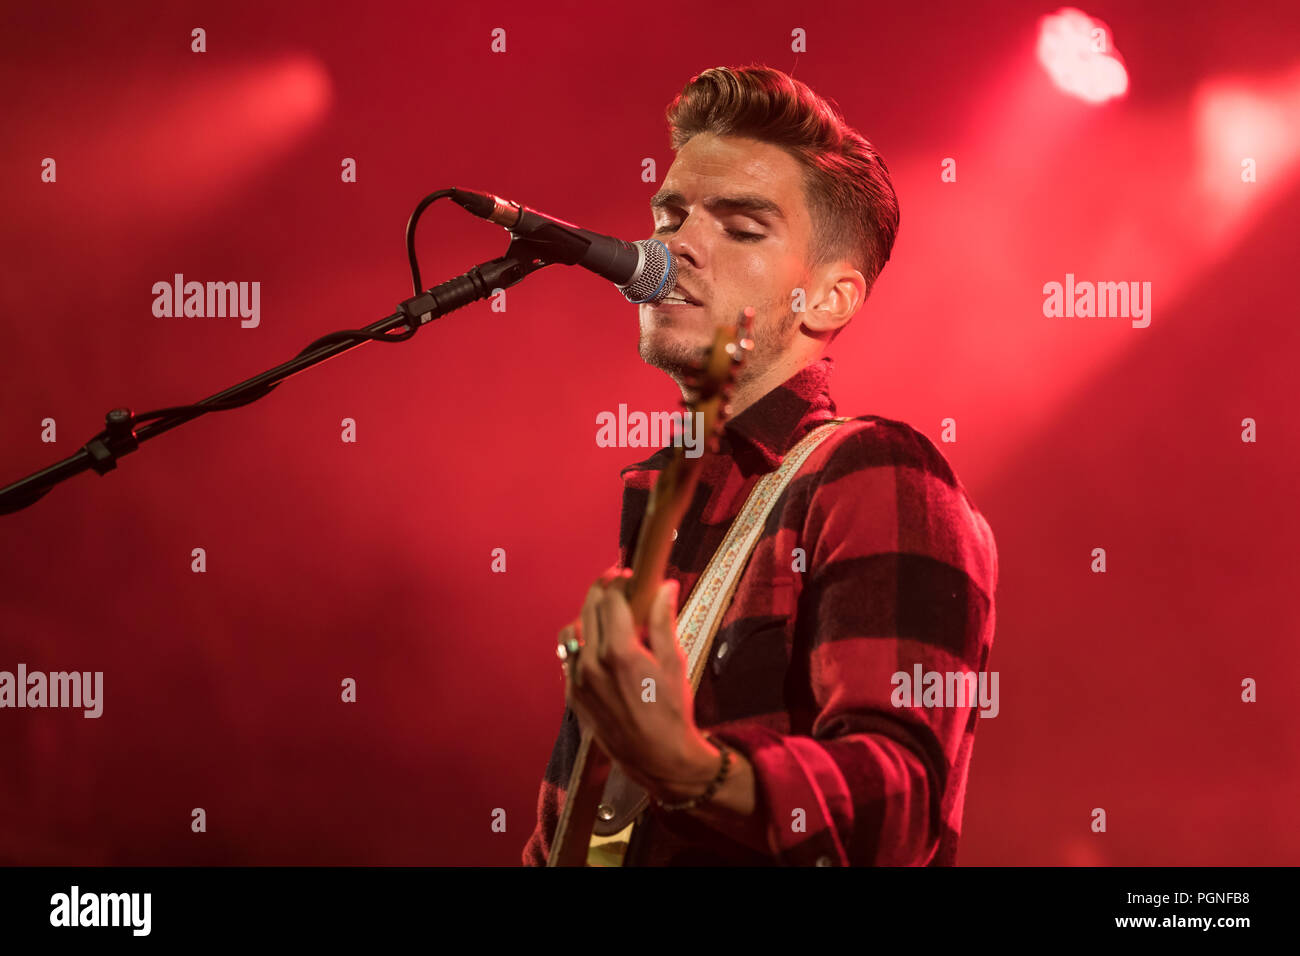 The Icelandic rock band Kaleo with singer and frontman Jökull Júlíusson live at the 28th Heitere Open Air in Zofingen, Aargau Stock Photo